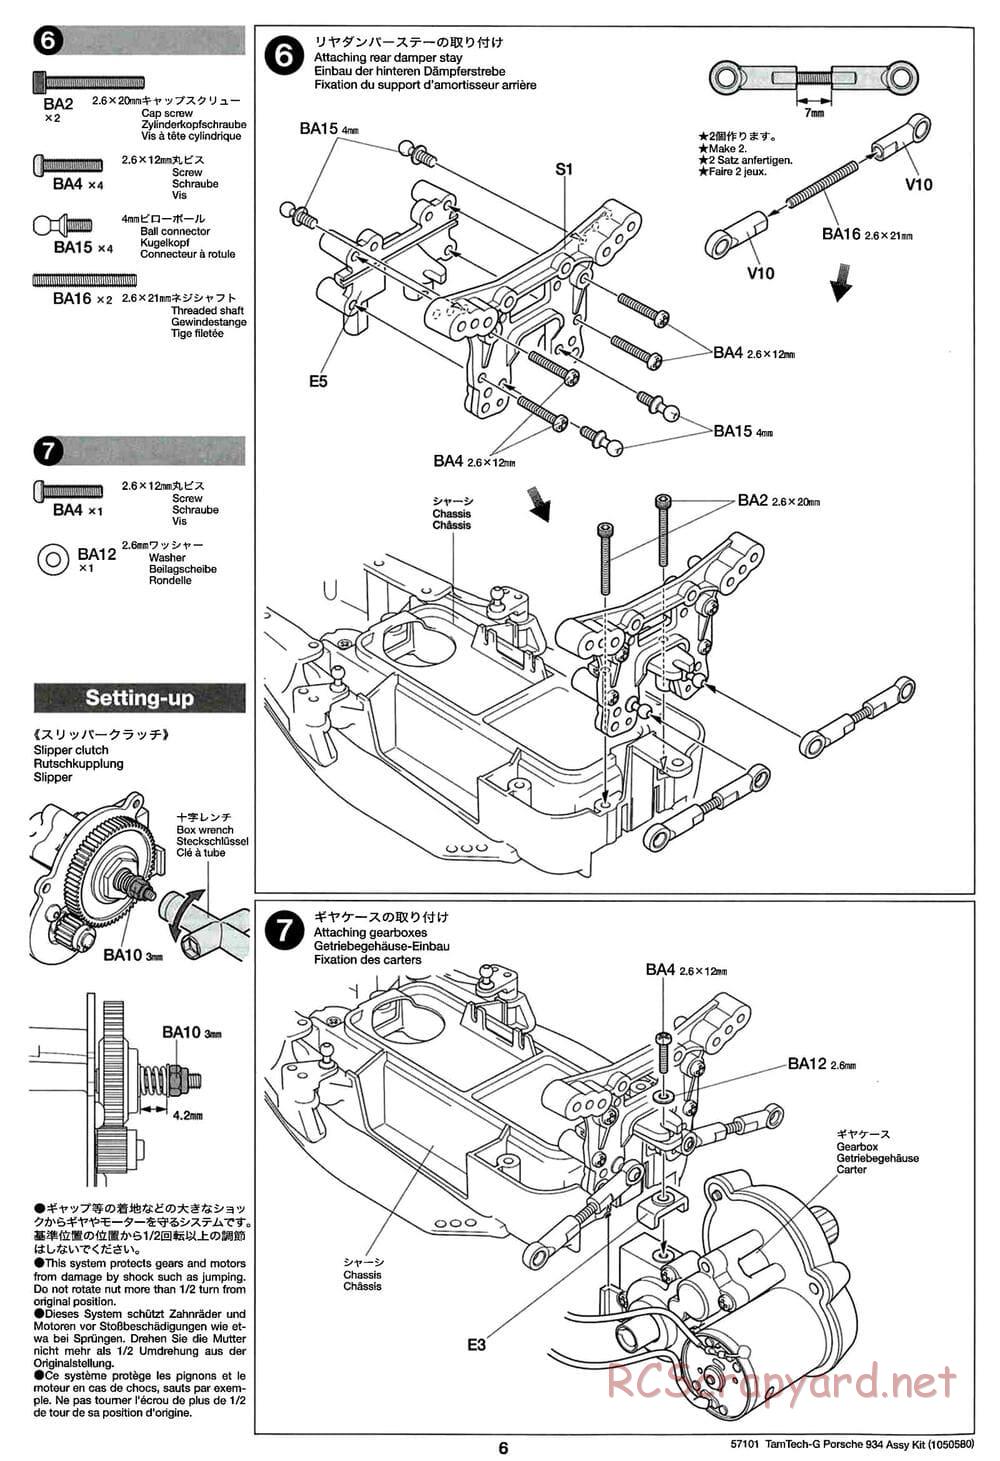 Tamiya - Porsche Turbo RSR - GT-01 Chassis - Manual - Page 6